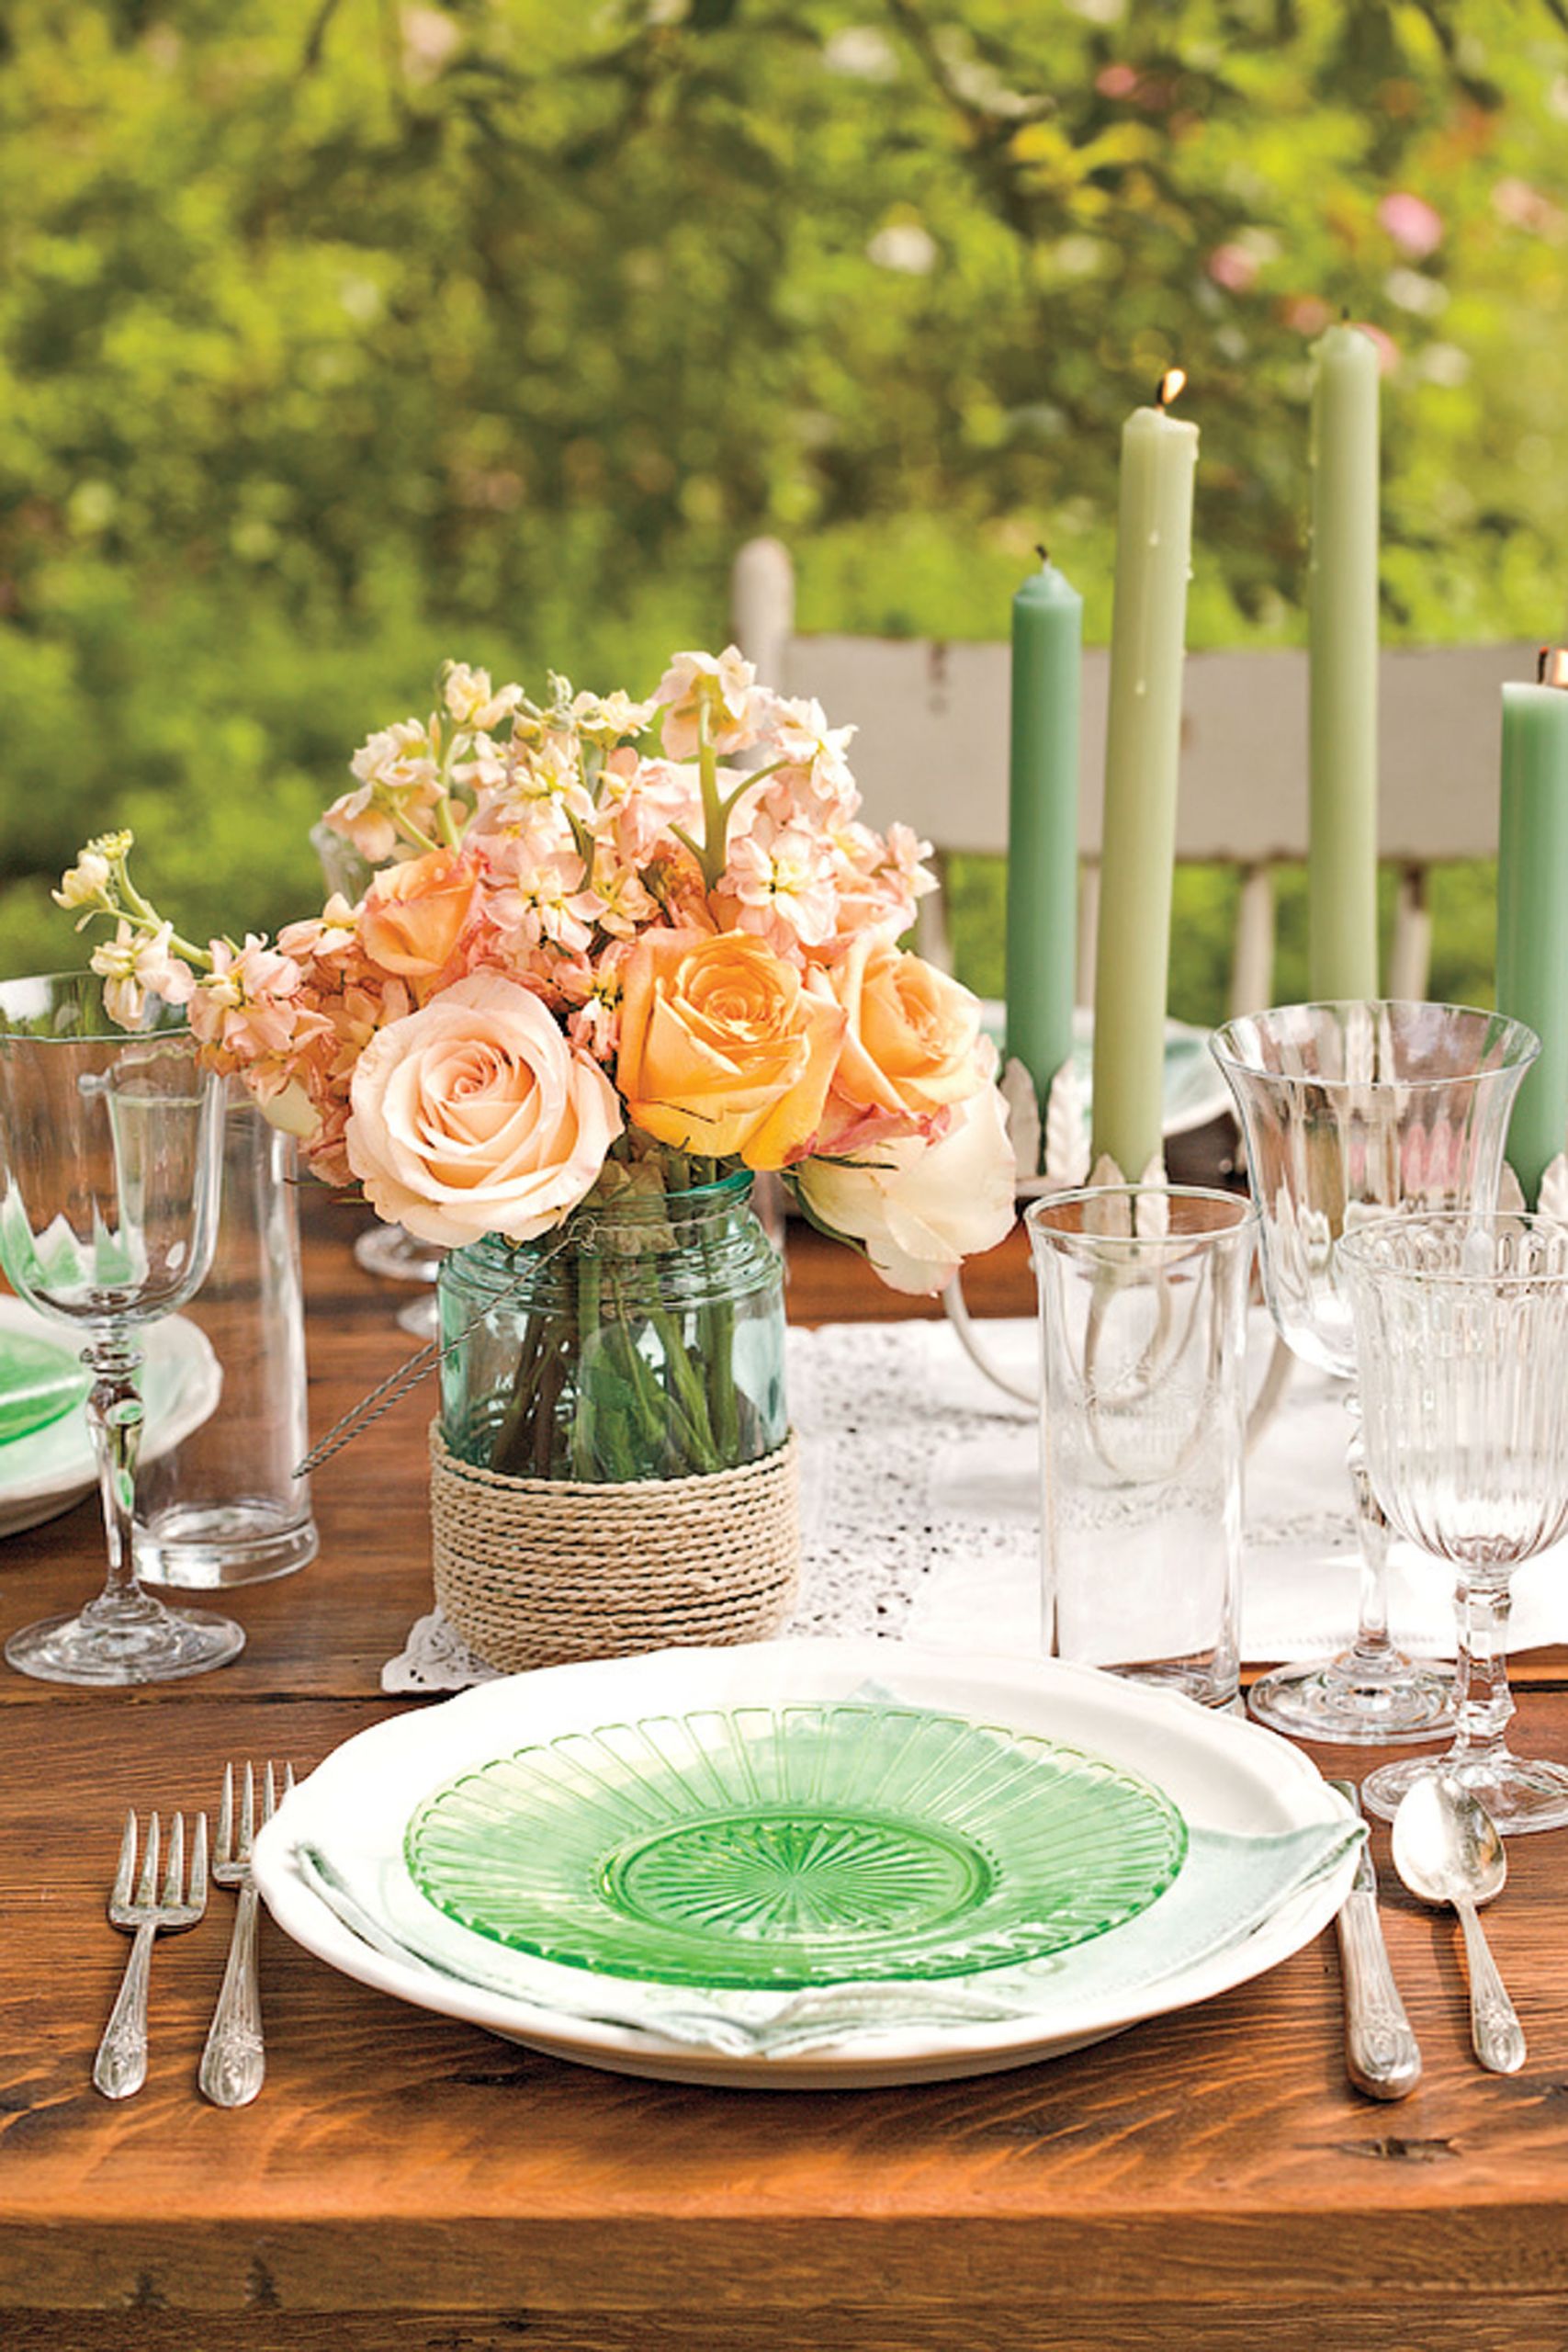 Spring Dinner Party Ideas
 35 Perfect Spring Table Decorations Ideas For Dinner